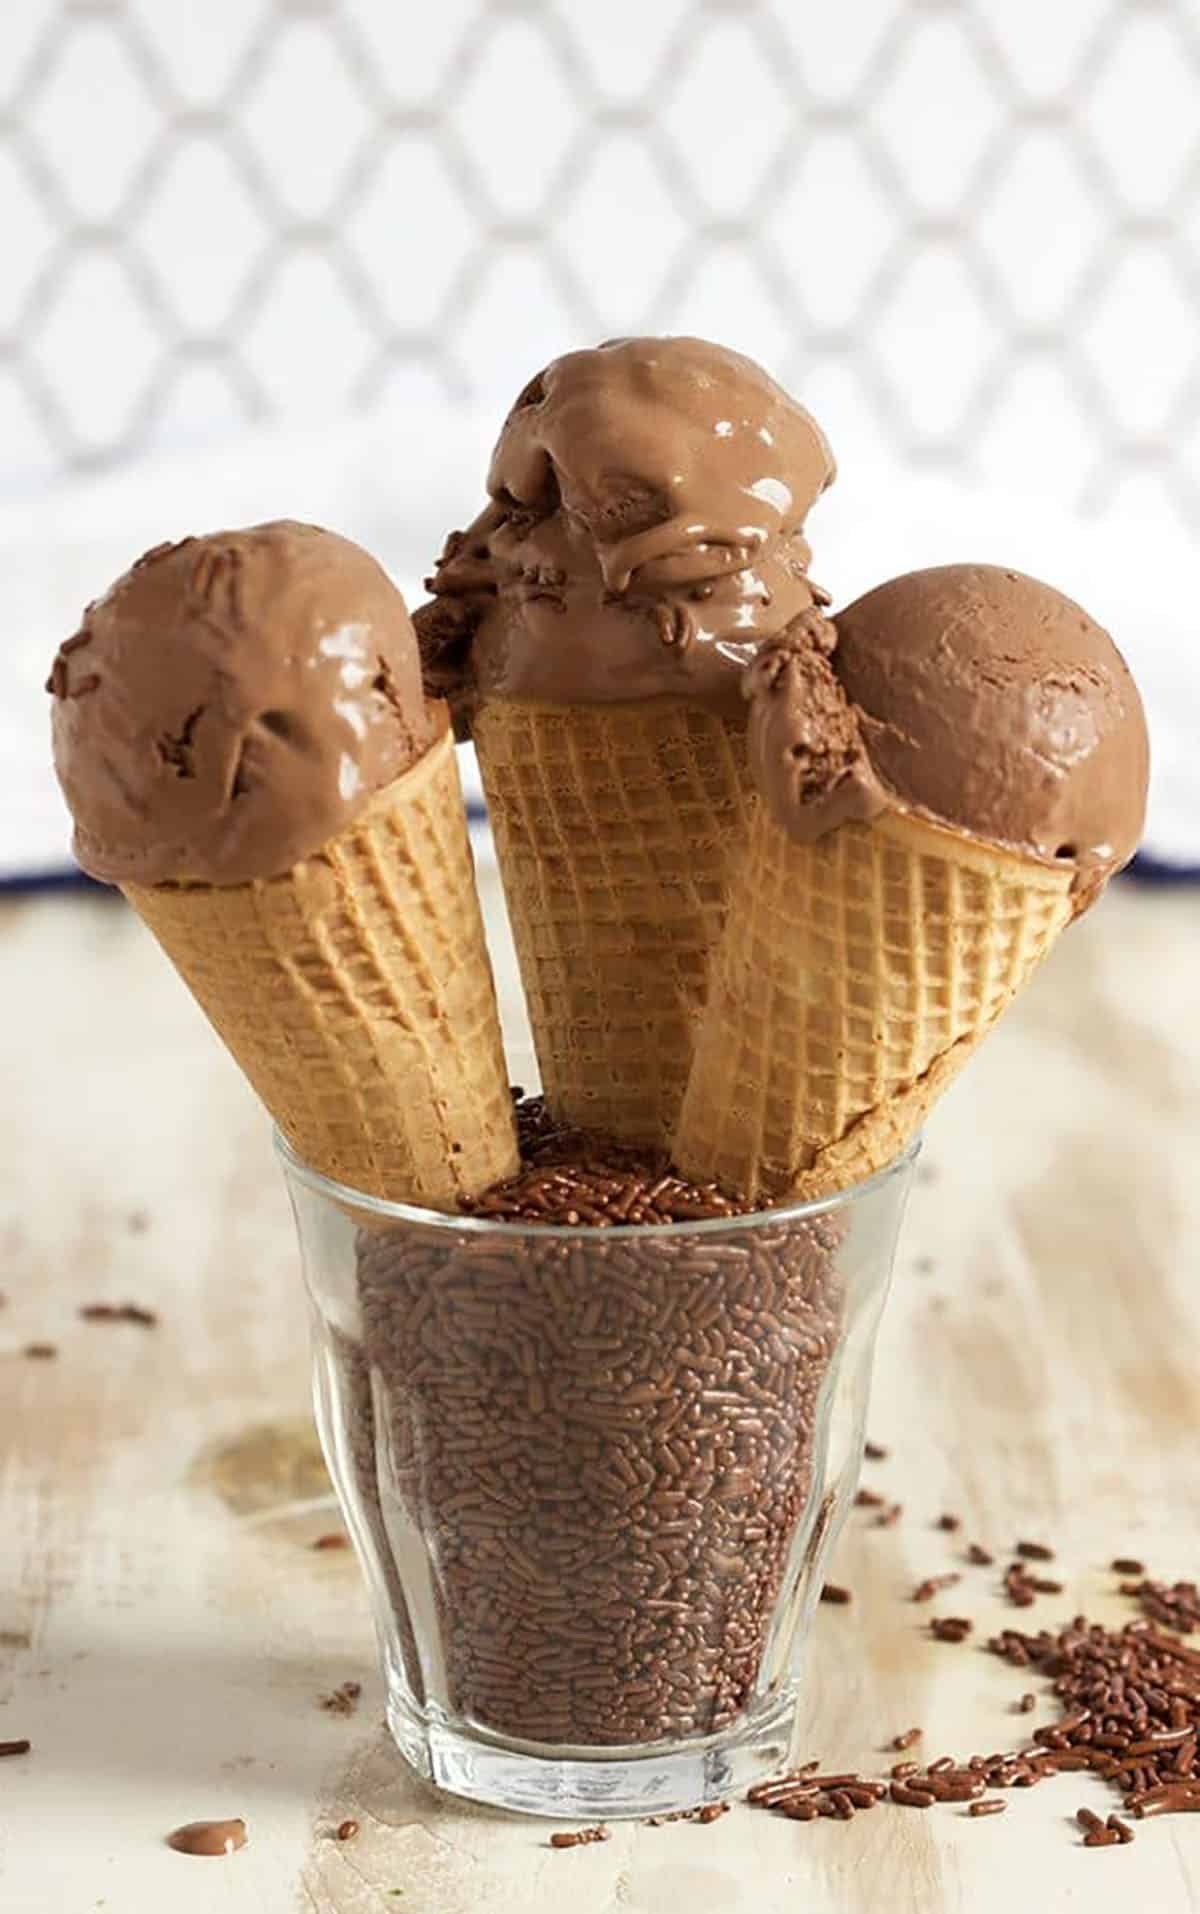 Three cones of chocolate ice cream propped in a glass with chocolate sprinkles.